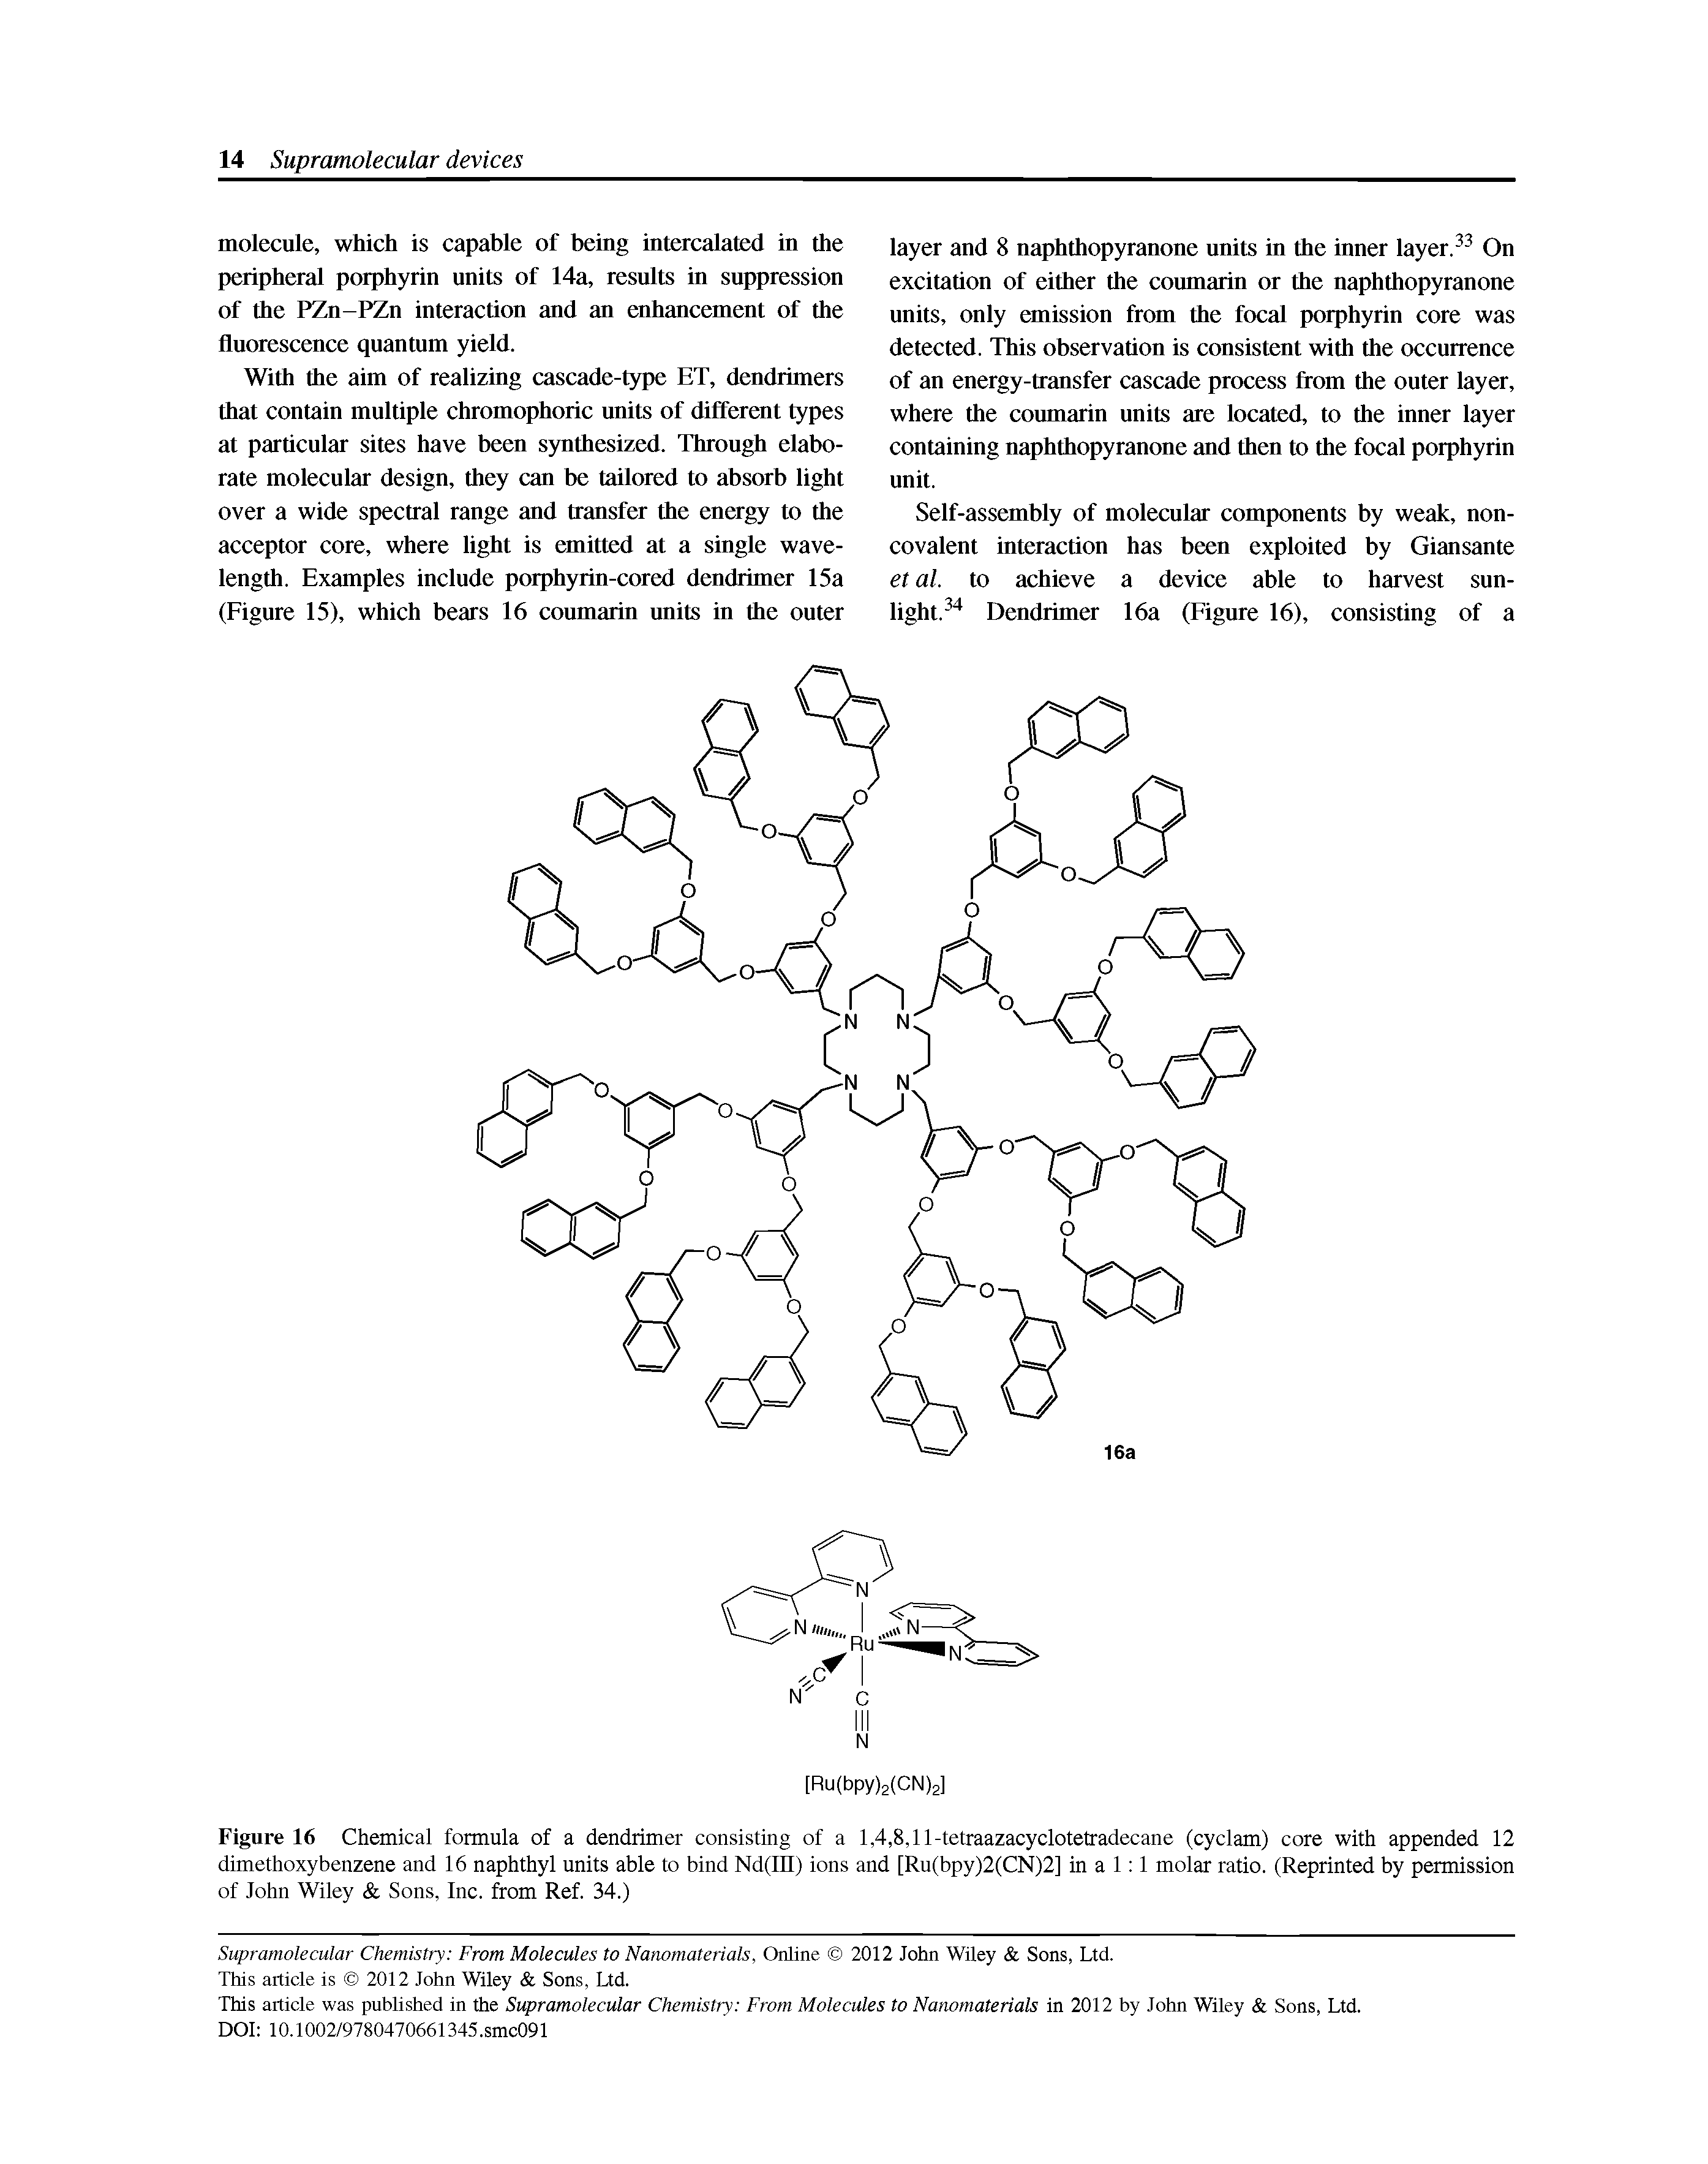 Figure 16 Chemical formula of a dendrimer consisting of a 1,4,8,11-tetraazacyclotetradecane (cyclam) core with appended 12 dimethoxybenzene and 16 naphthyl units able to bind Nd(III) ions and [Ru(bpy)2(CN)2] in a 1 1 molar ratio. (Reprinted by permission of John Wiley Sons, Inc. from Ref. 34.)...